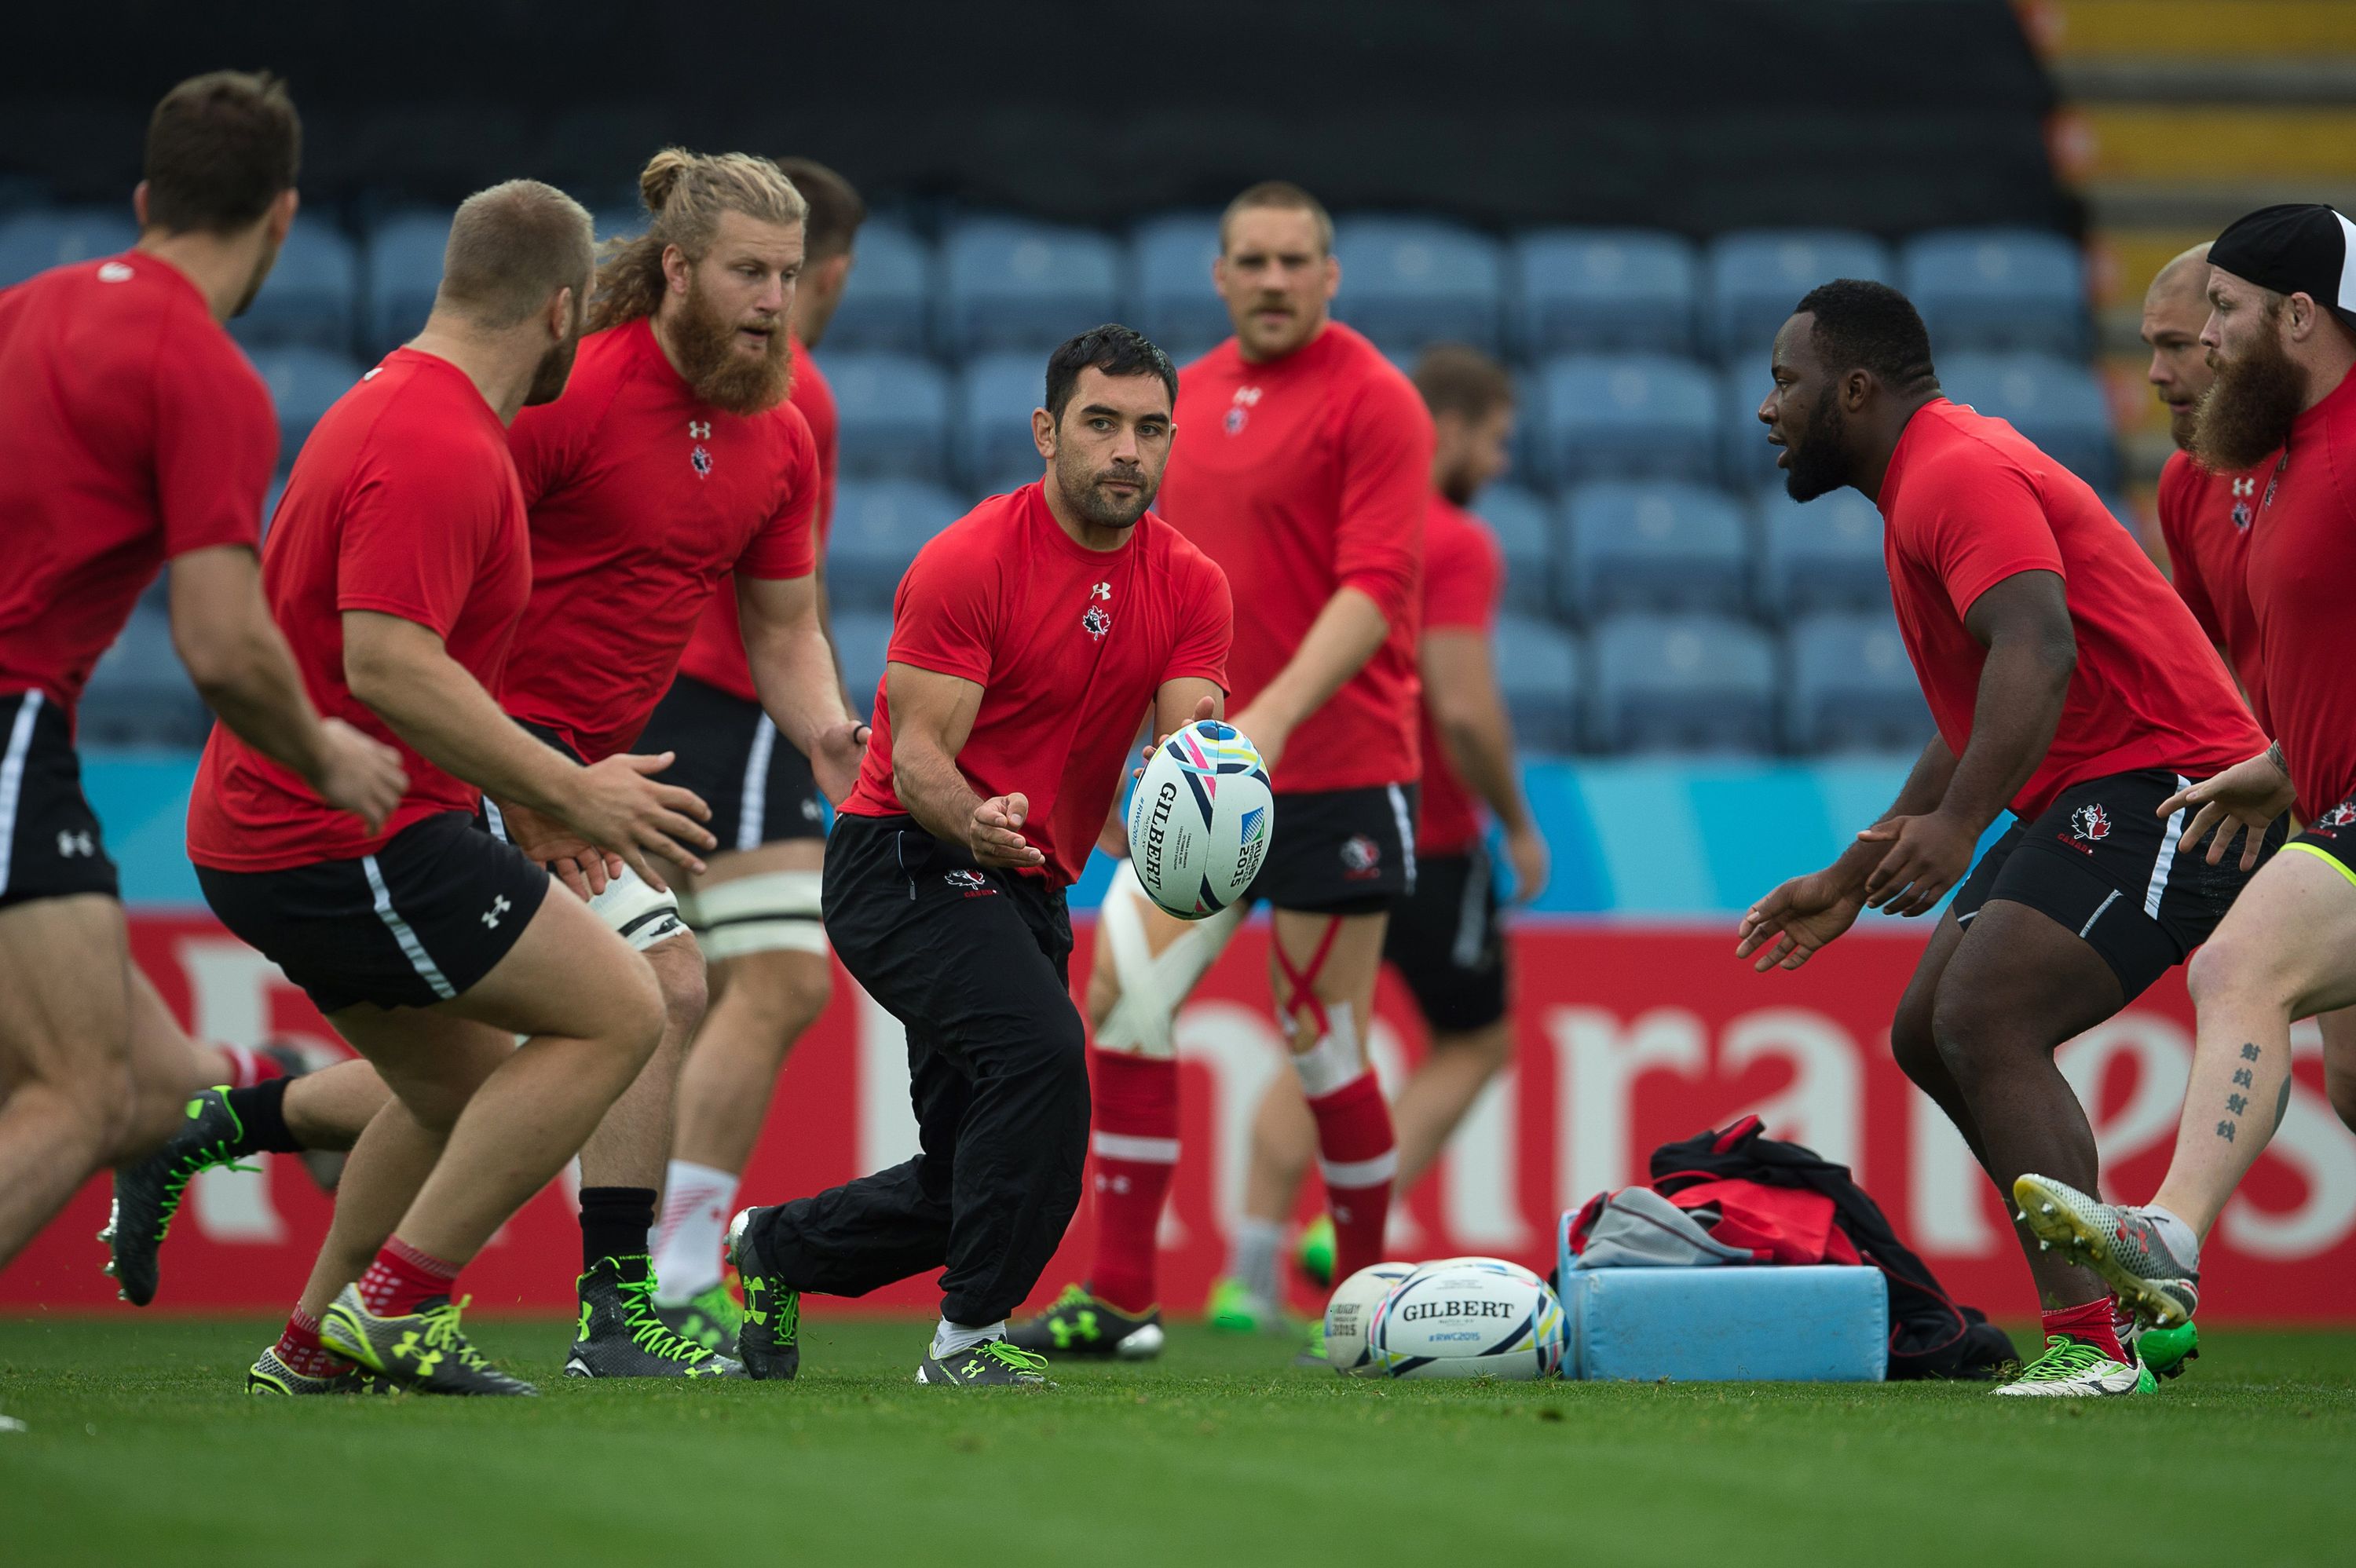 Canada's scrum half Phil Mack (C) passes the ball during a captain's run training session in Leicester, central England, on October 5, 2015, on the eve of their 2015 Rugby Union World Cup match against Romania. AFP PHOTO / BERTRAND LANGLOIS RESTRICTED TO EDITORIAL USE        (Photo credit should read BERTRAND LANGLOIS/AFP/Getty Images)